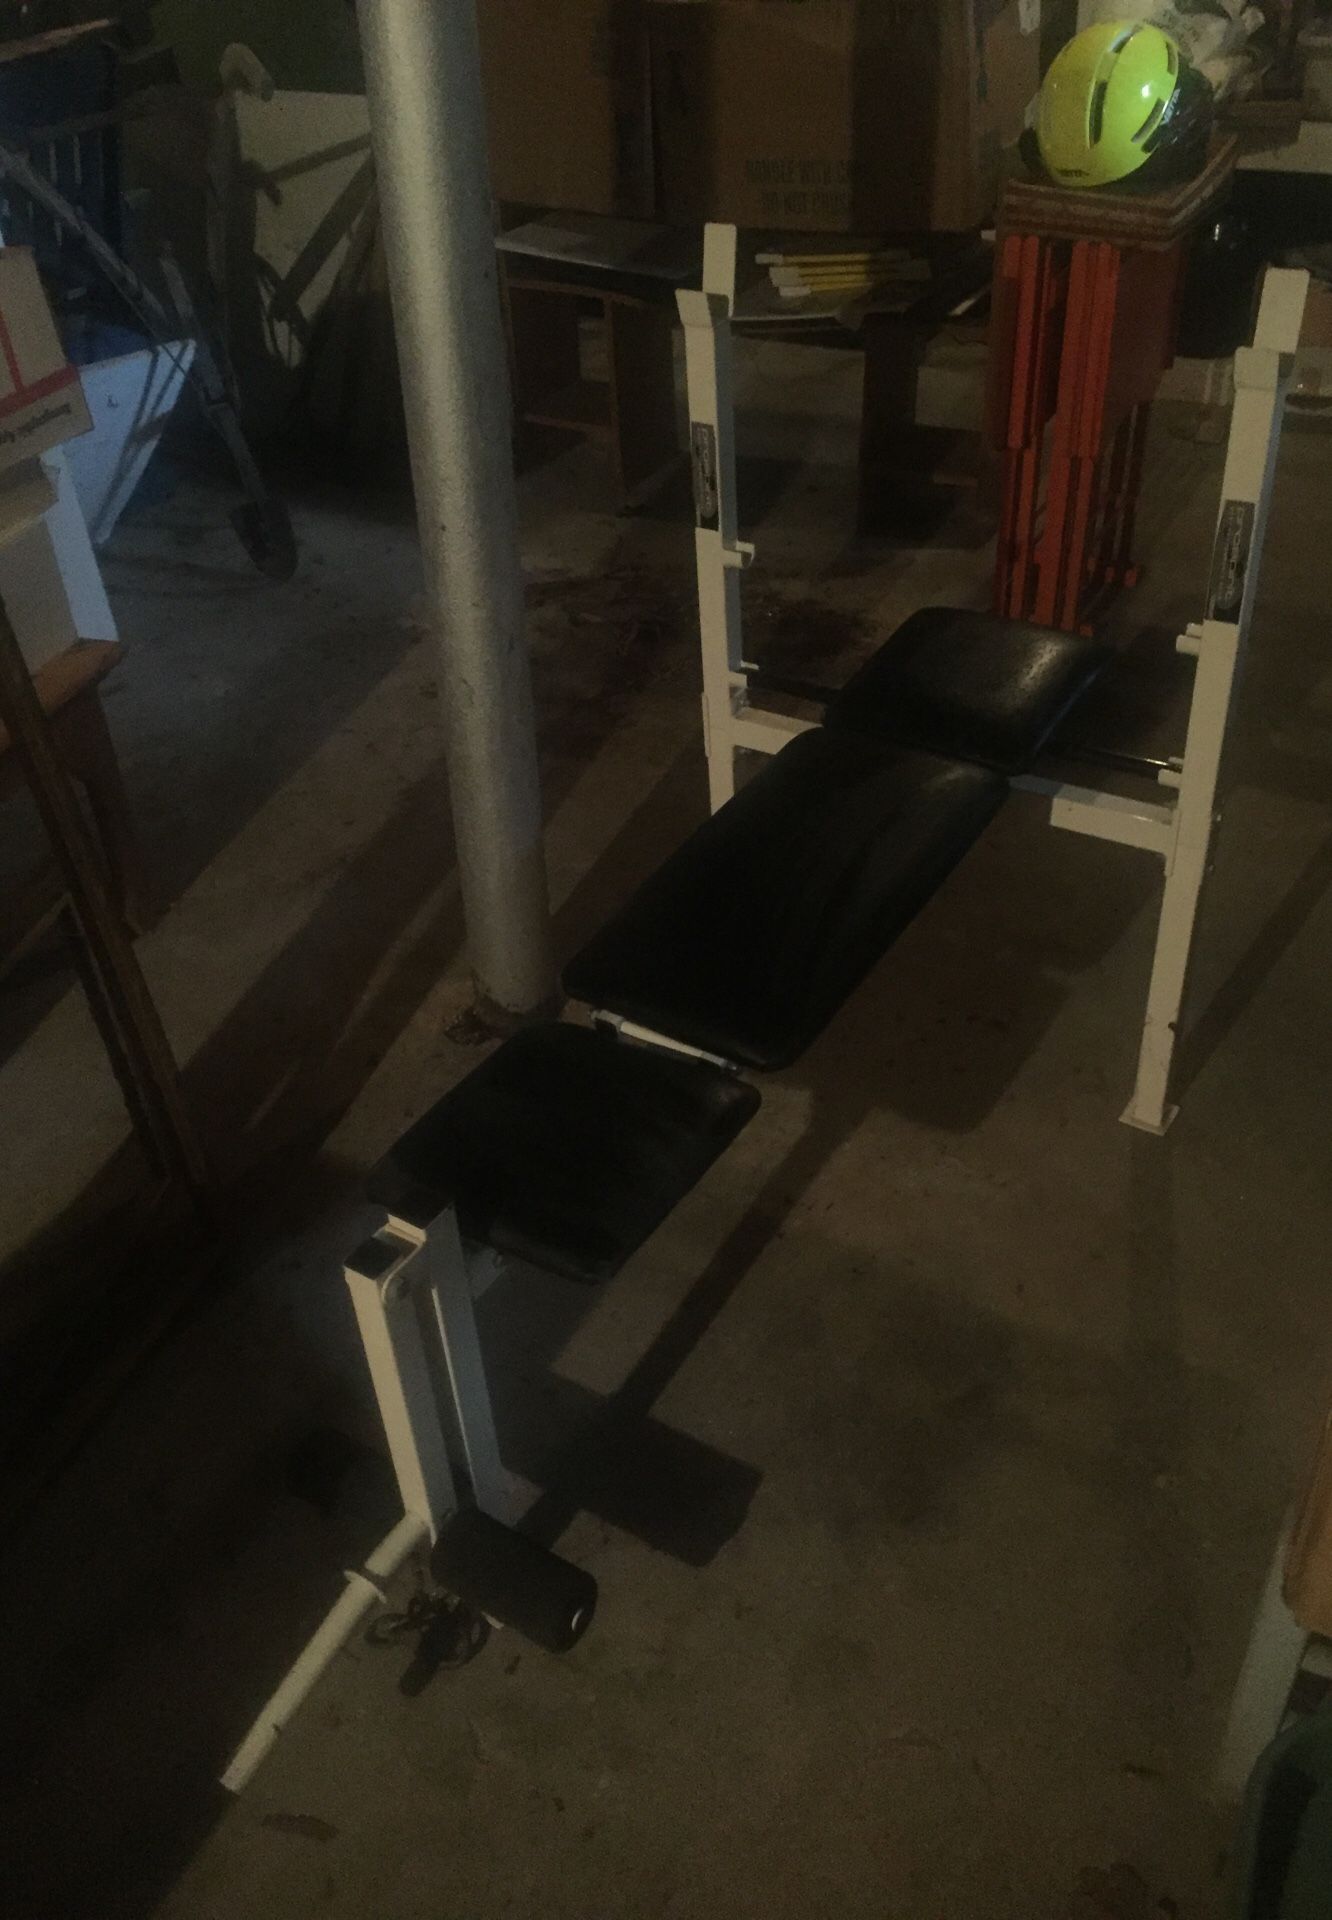 Bench press with barbells and weights